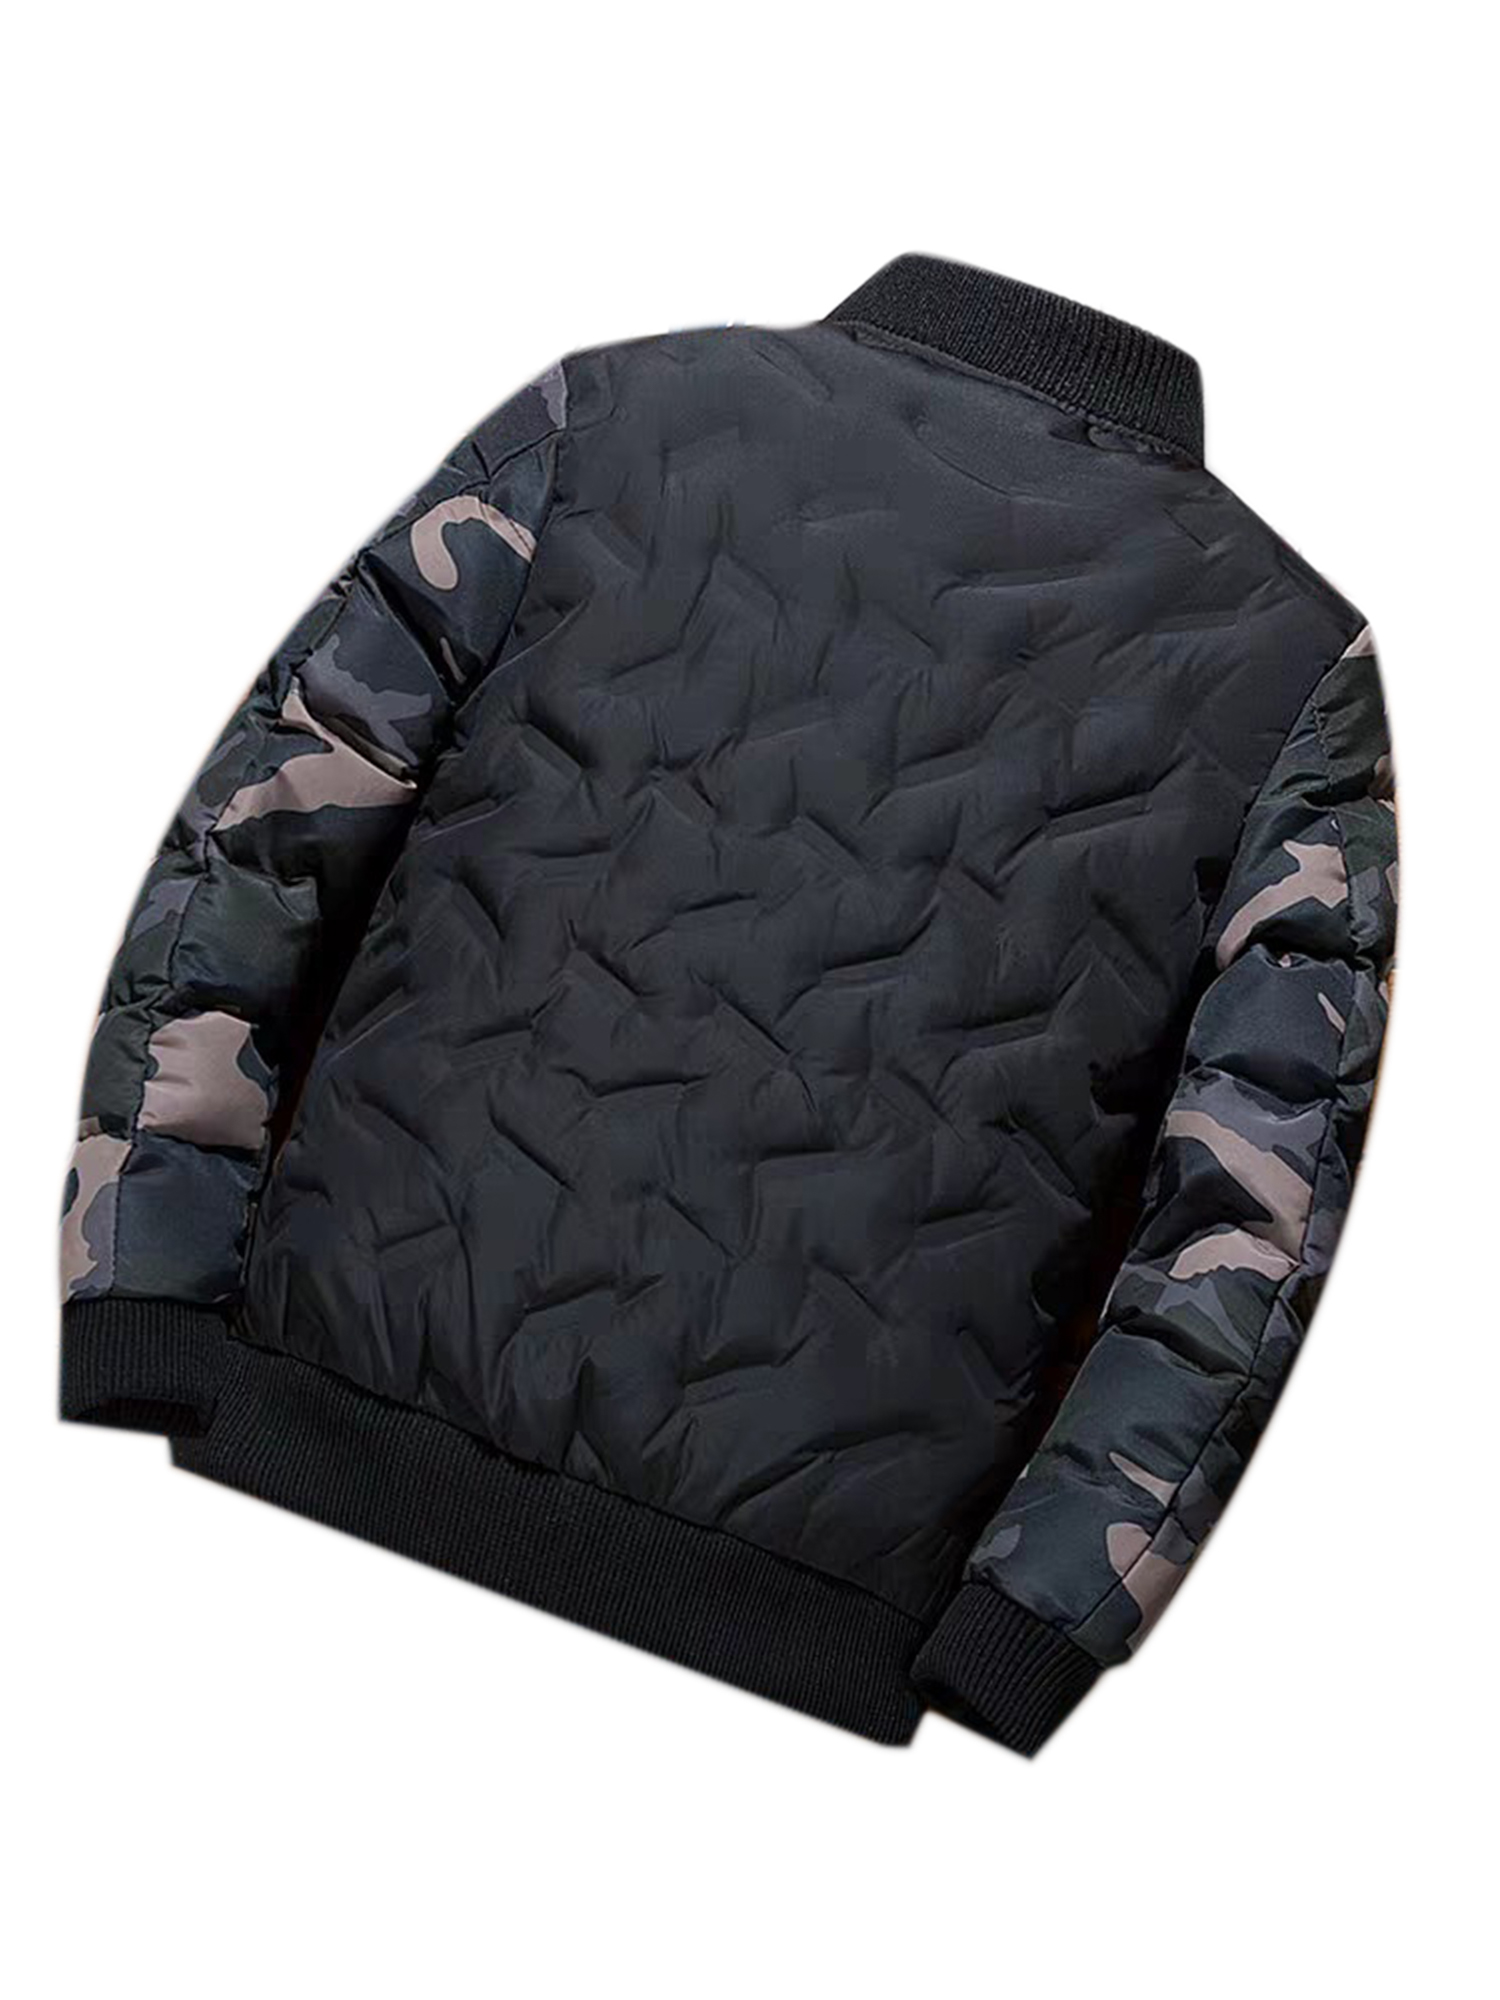 UKAP Mens Full Zip Up Insulated Bomber Jacket Warm Varsity Jacket with Camo Sleeves Stand Collar for Fall Winter - image 3 of 6